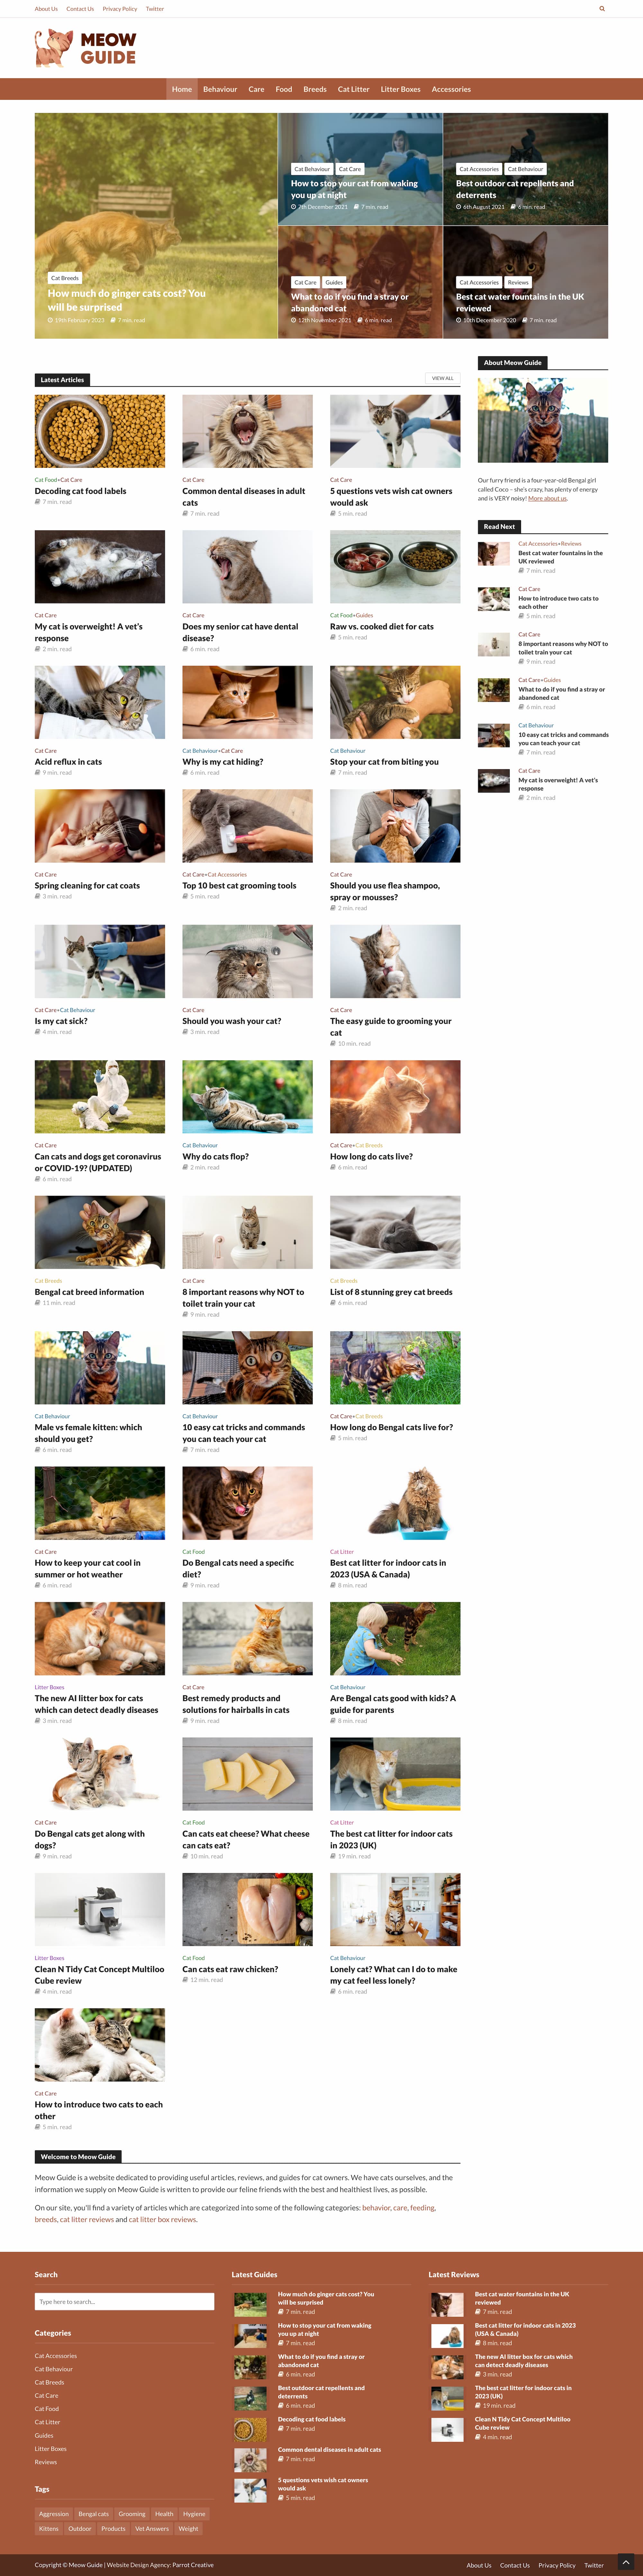 Meow Guide homepage design